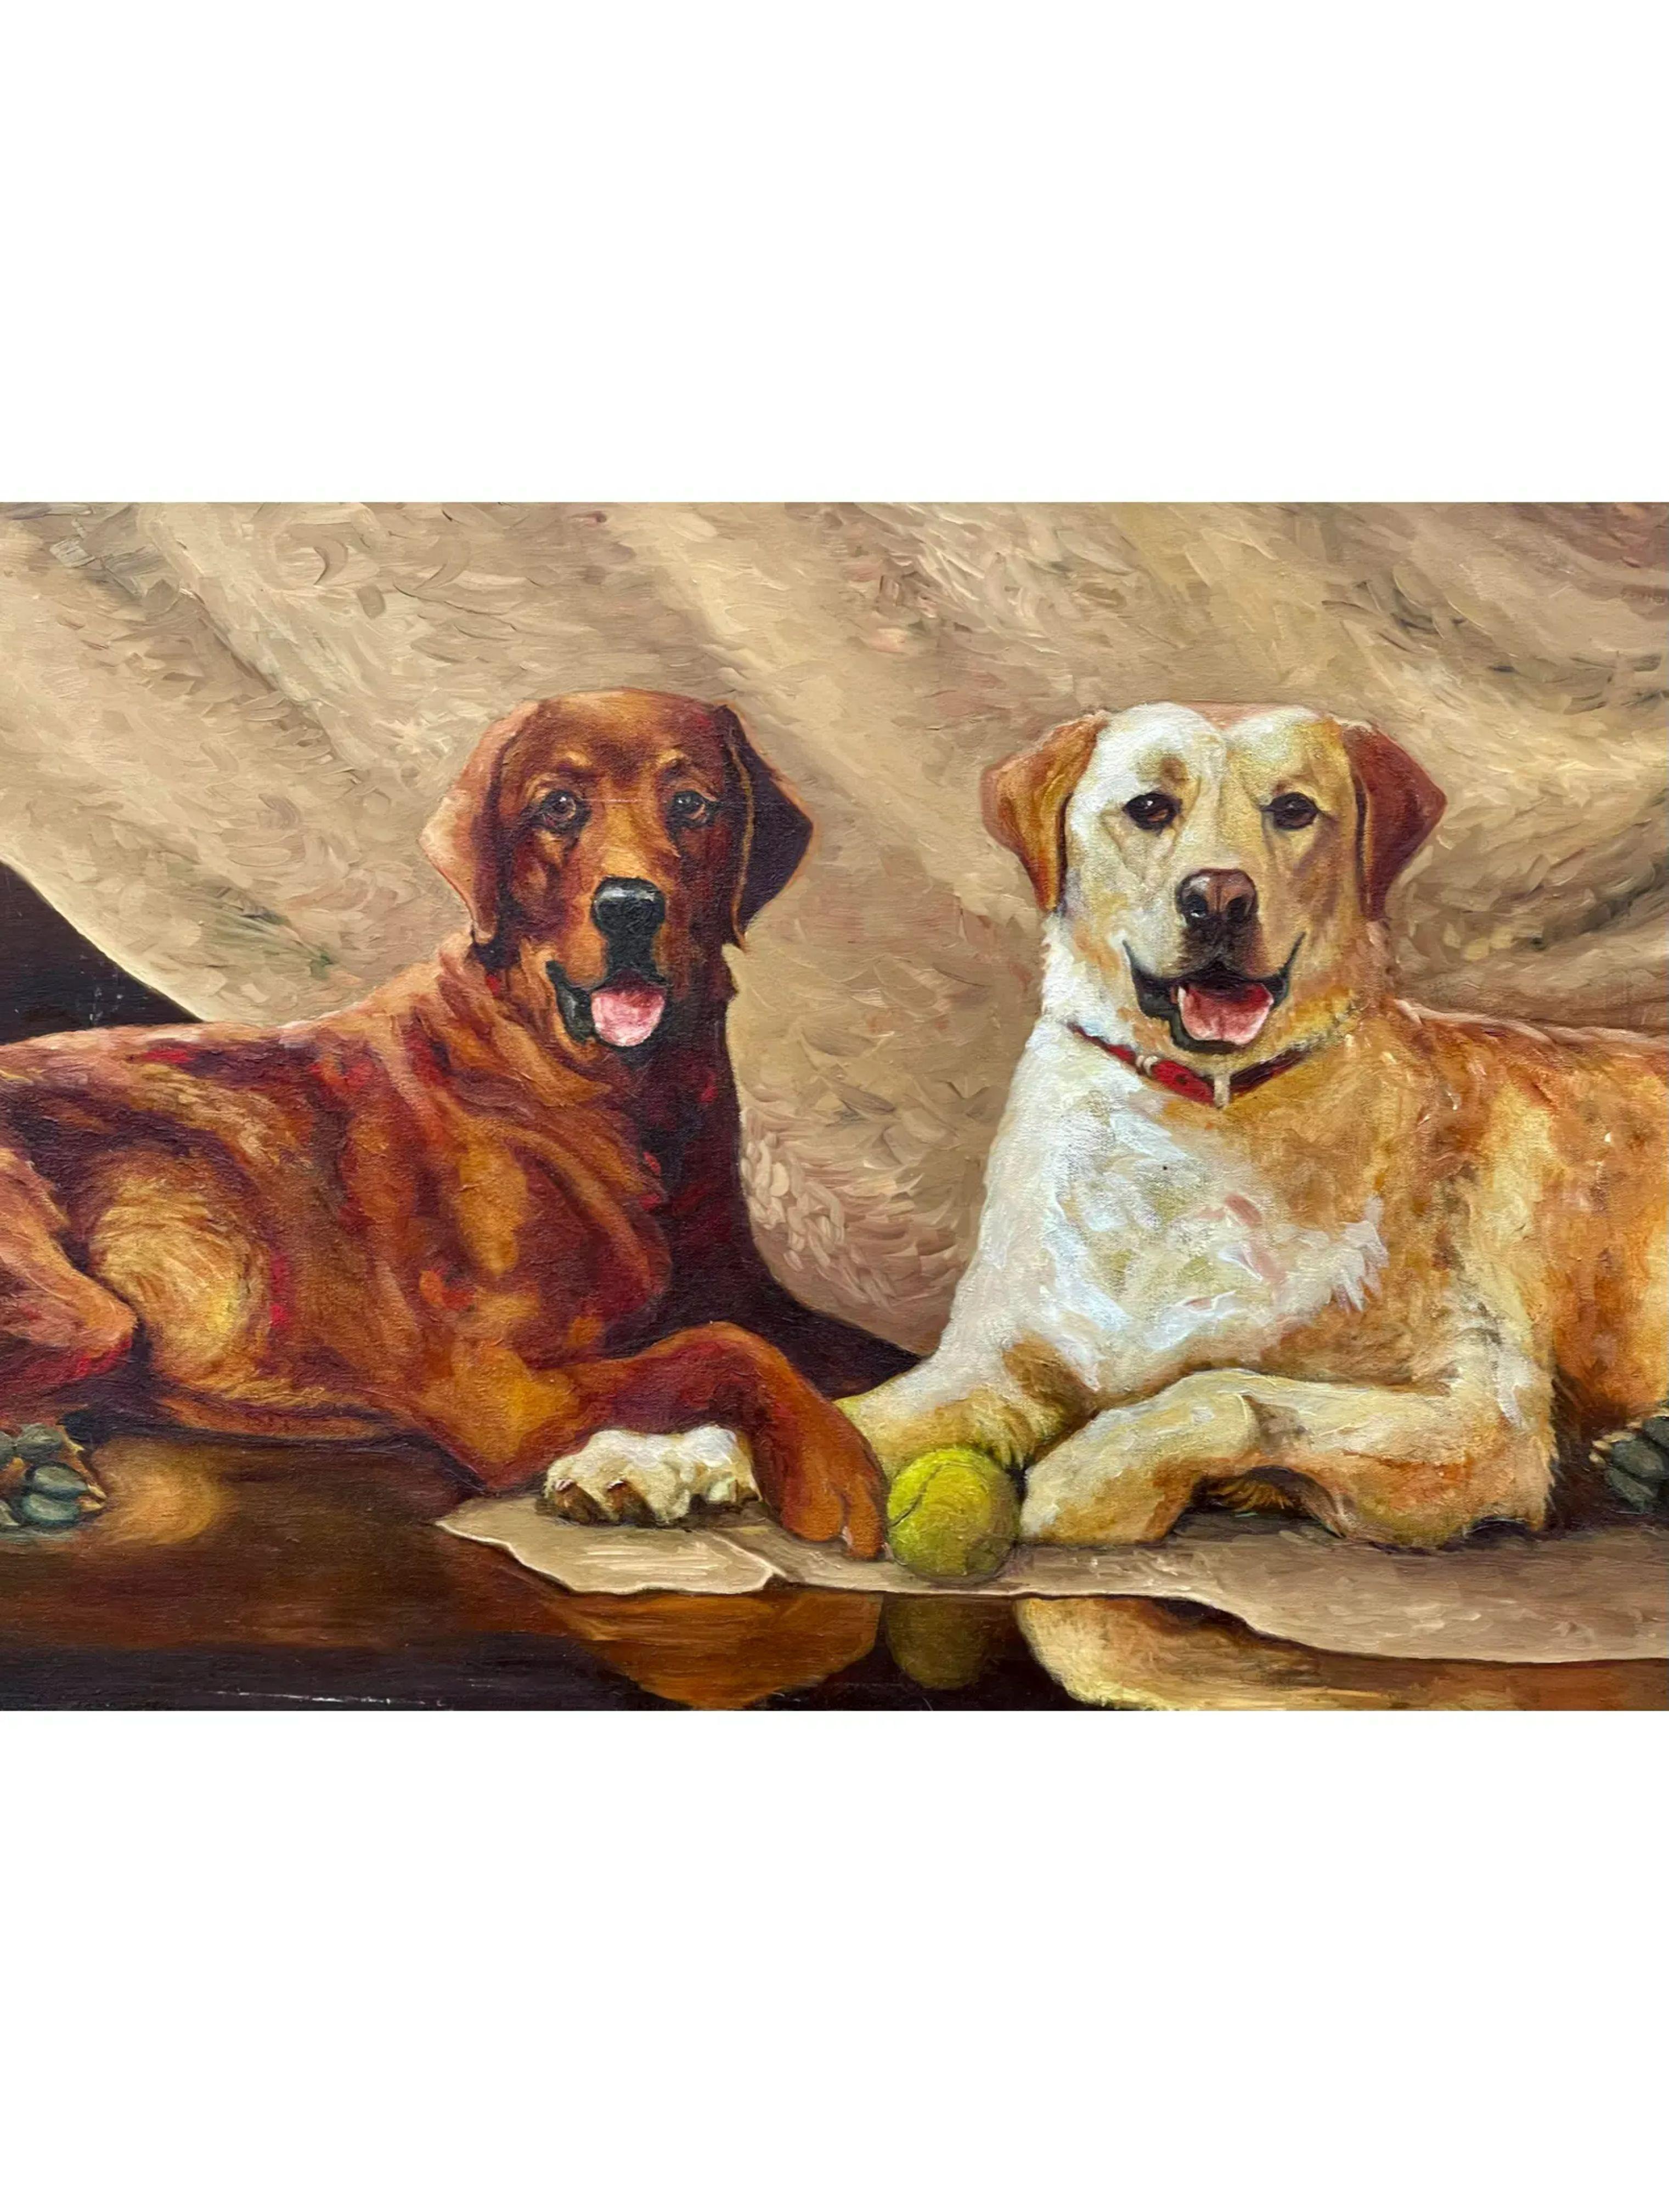 20th Century Vintage Original Oil Painting of 2 Dogs, 1980s